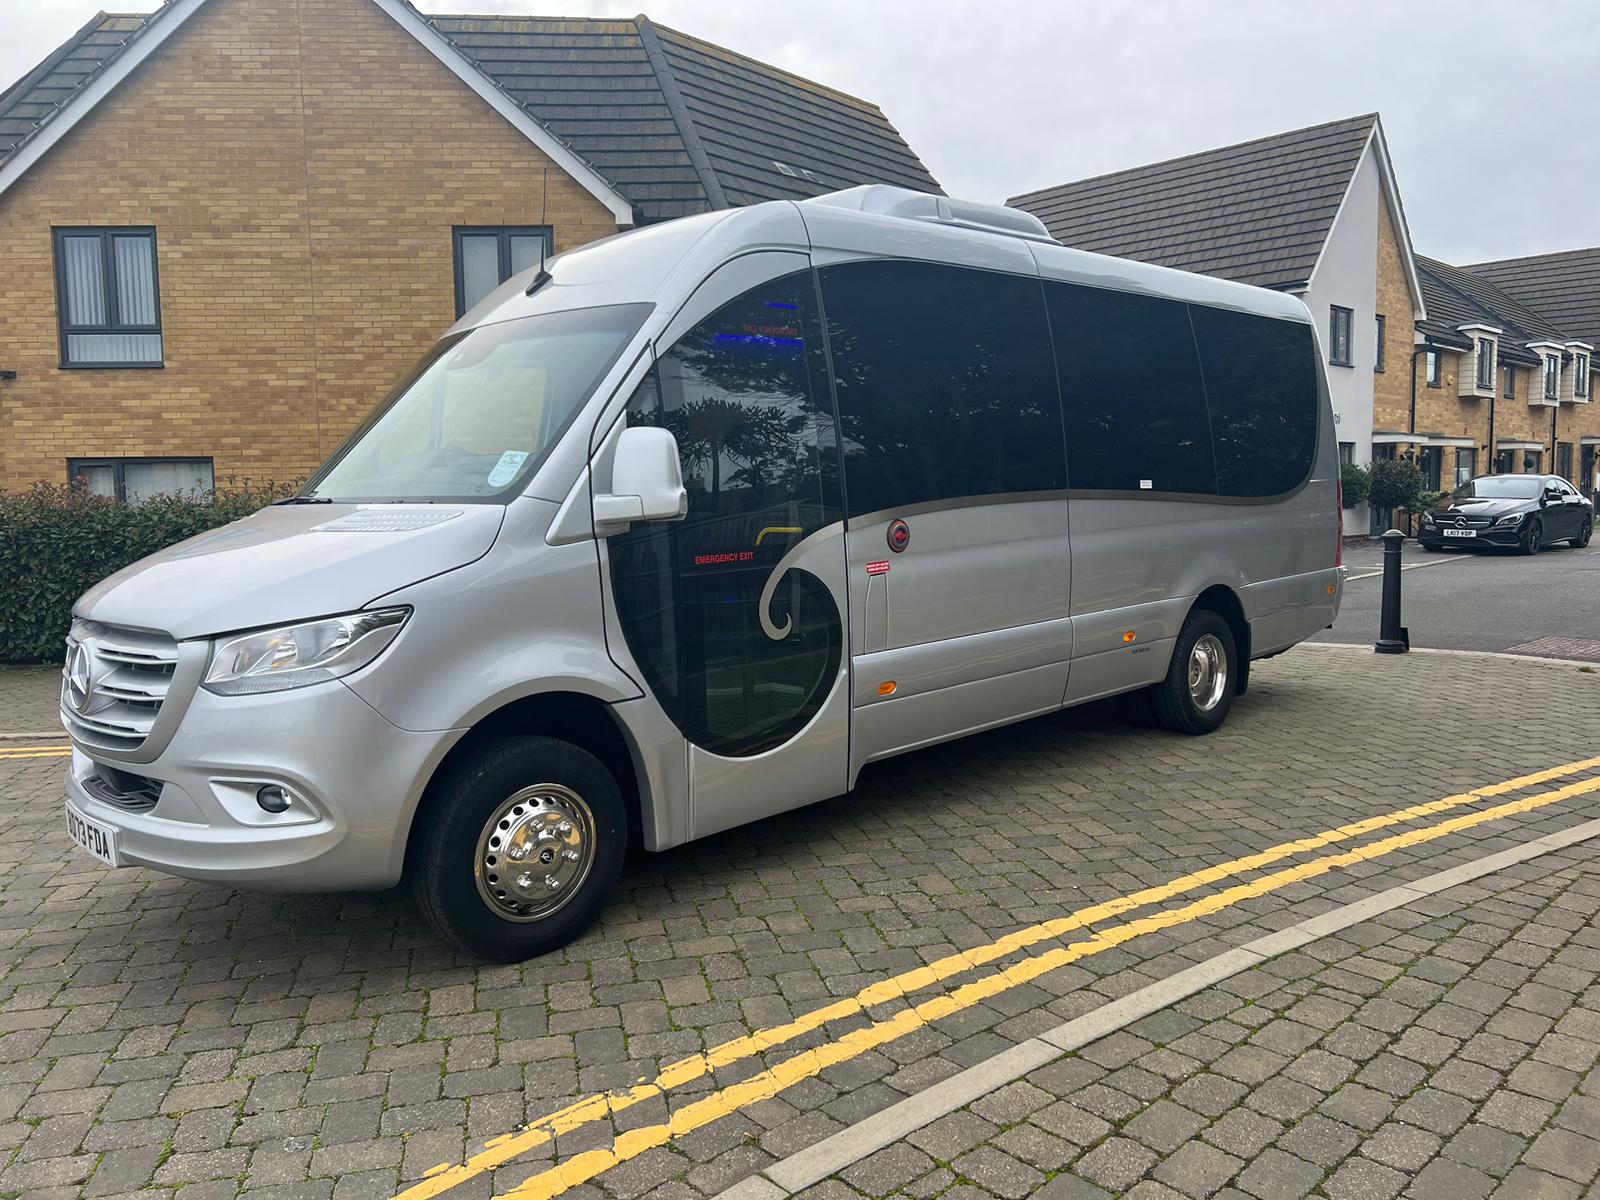 What to Expect from Minibus Hire Services in the Home Counties for Stress-free Events